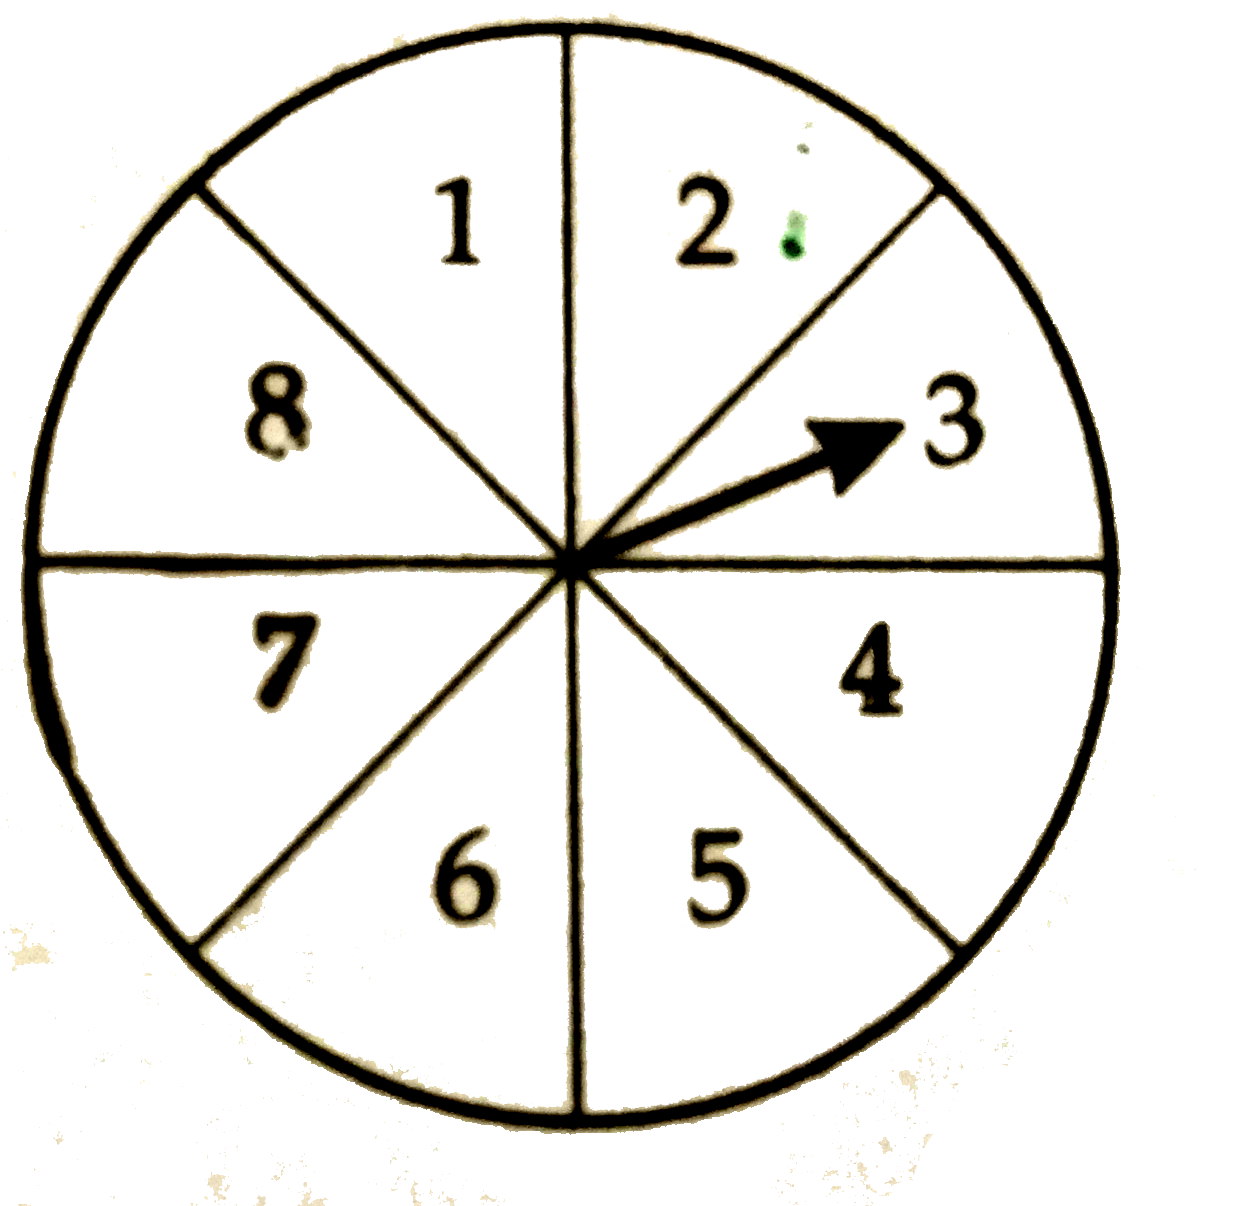 In a game of chance, a spinnig arrow comes to rest at one of the numbers 1,2,3,4,5,6,7,8. All these are equally likely outcomes. Find the probability that it wil rest at 8.